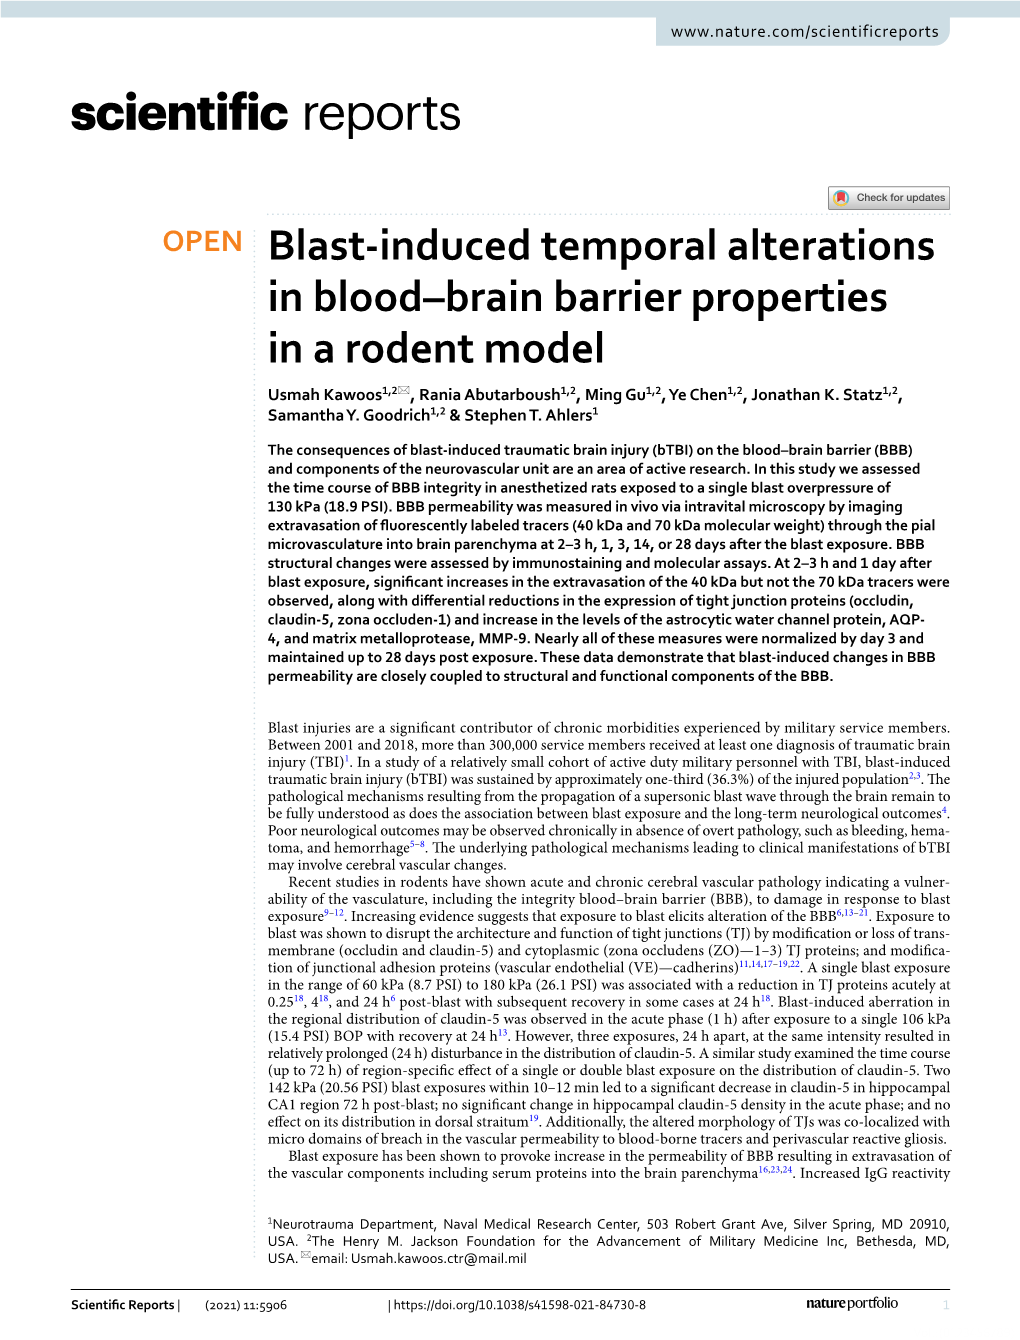 Blast-Induced Temporal Alterations in Blood–Brain Barrier Properties in A